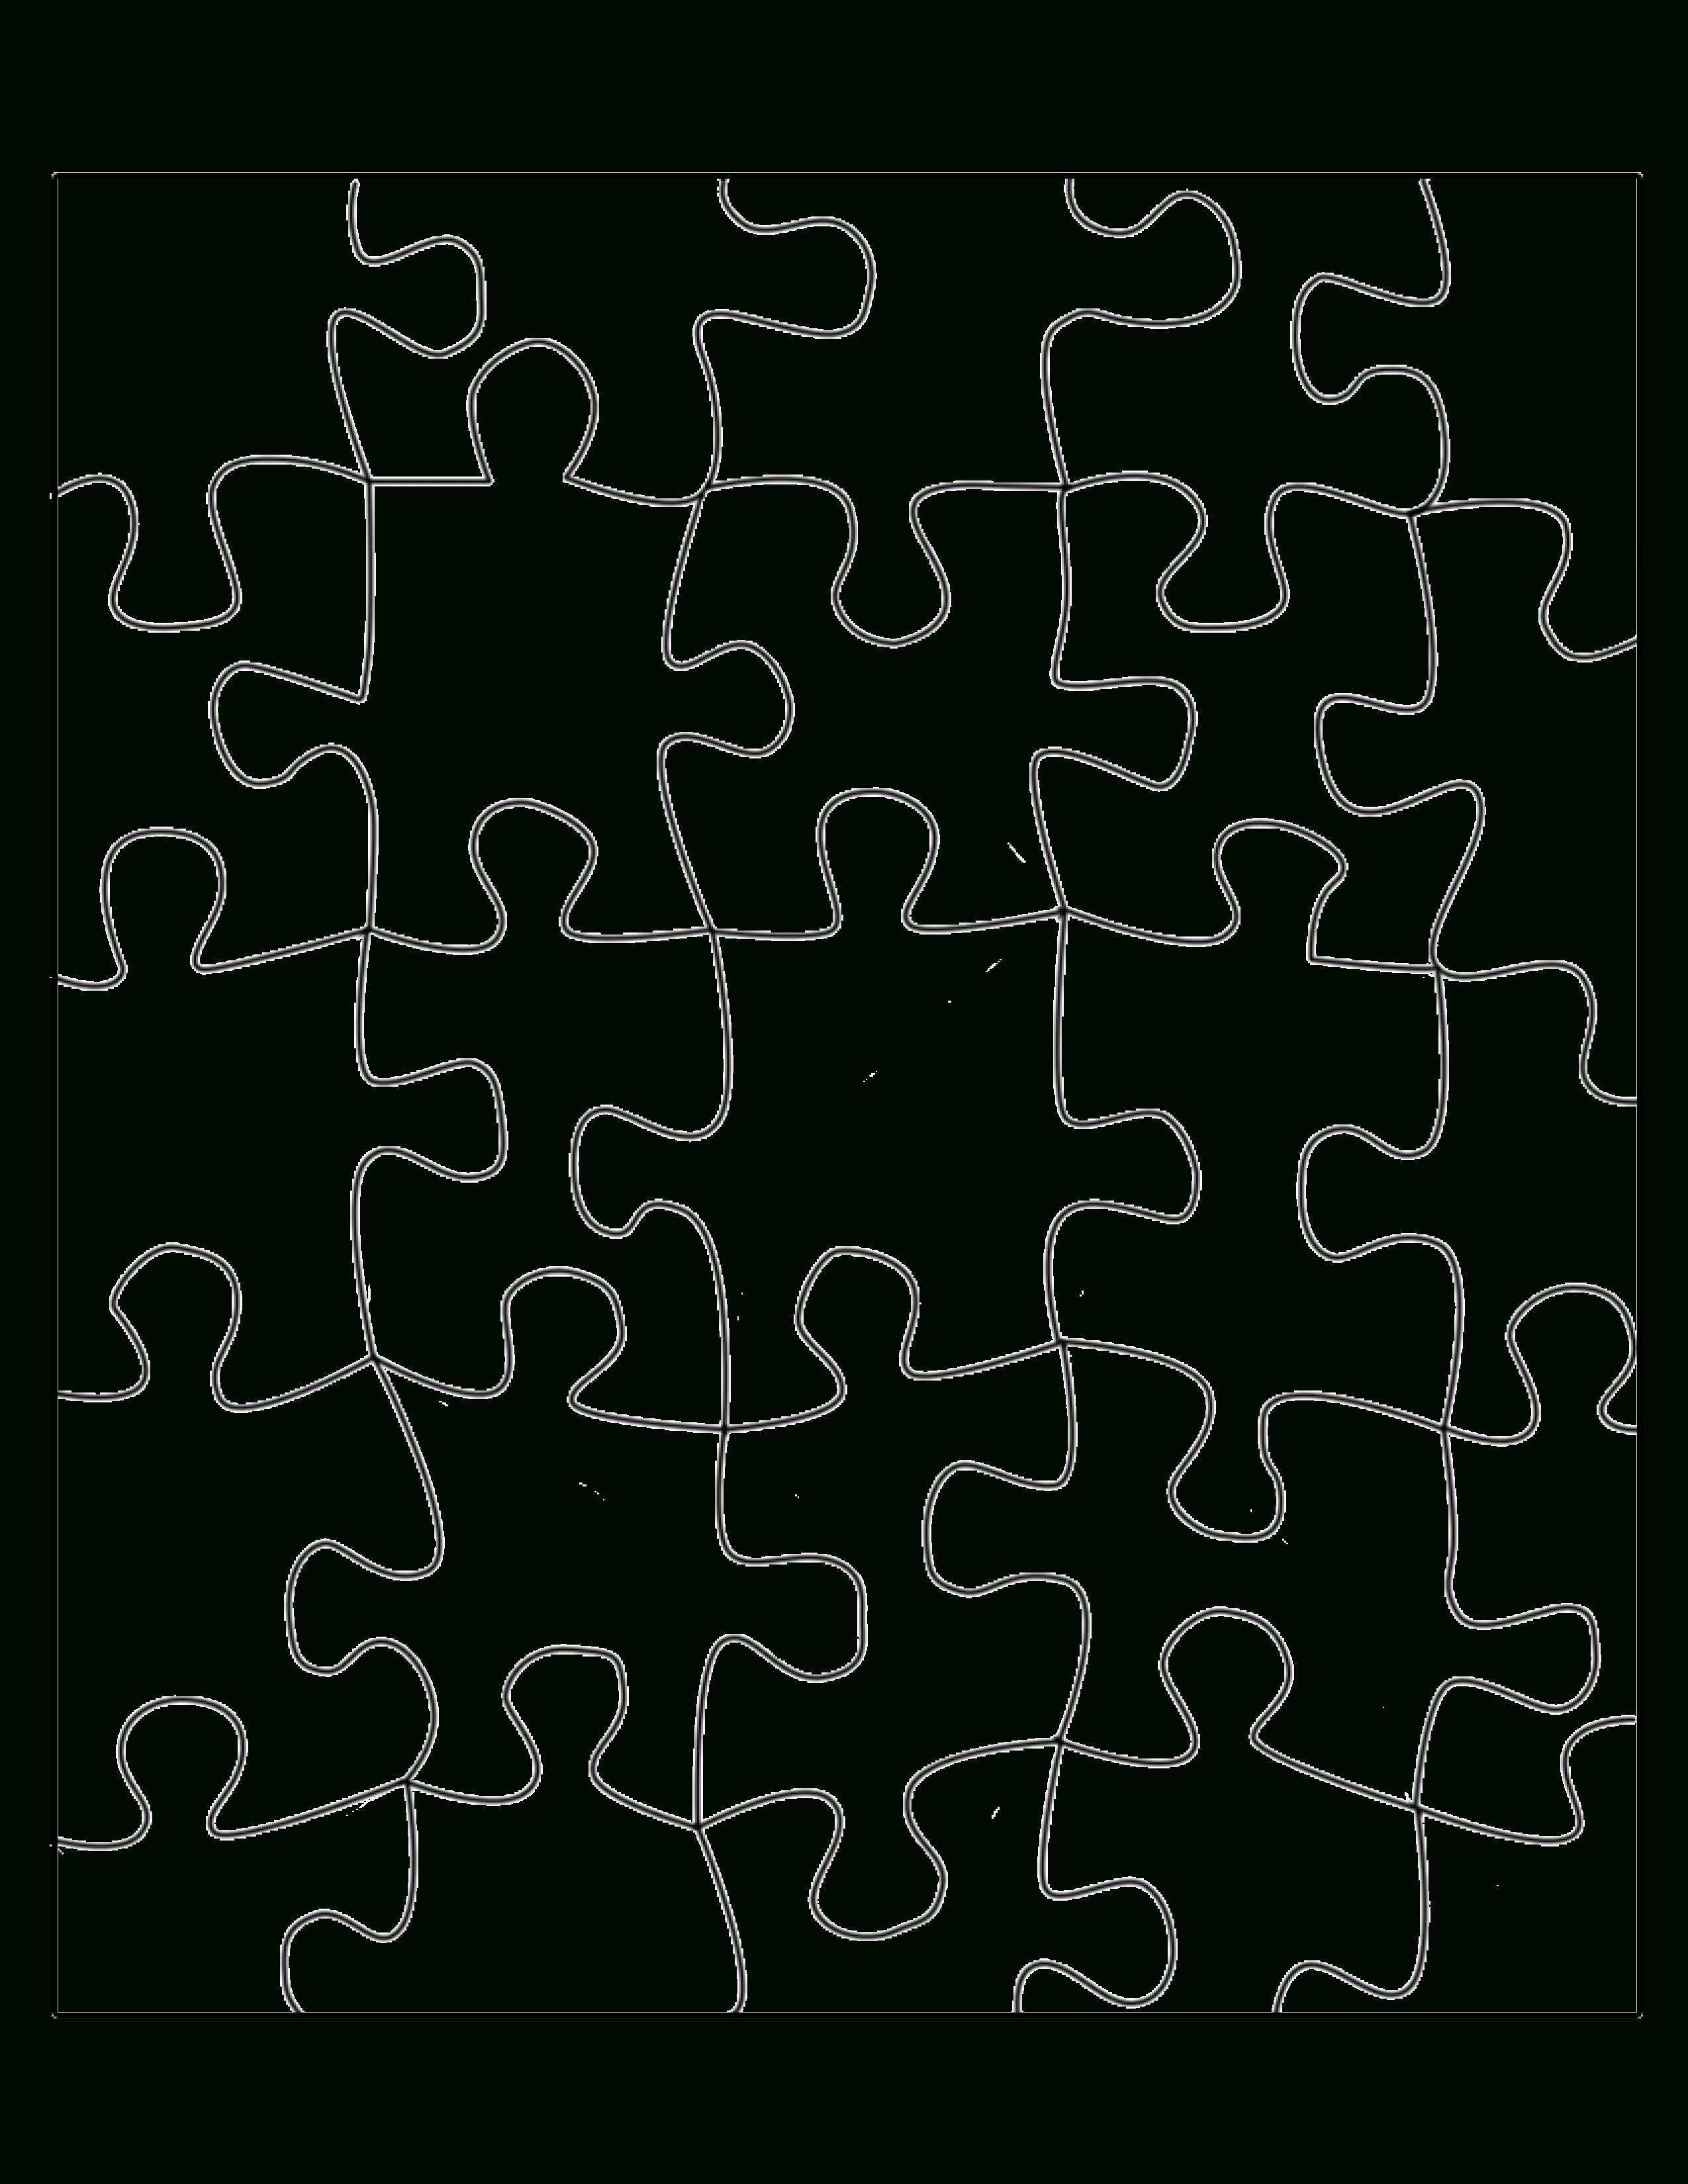 free printable jigsaw puzzle maker